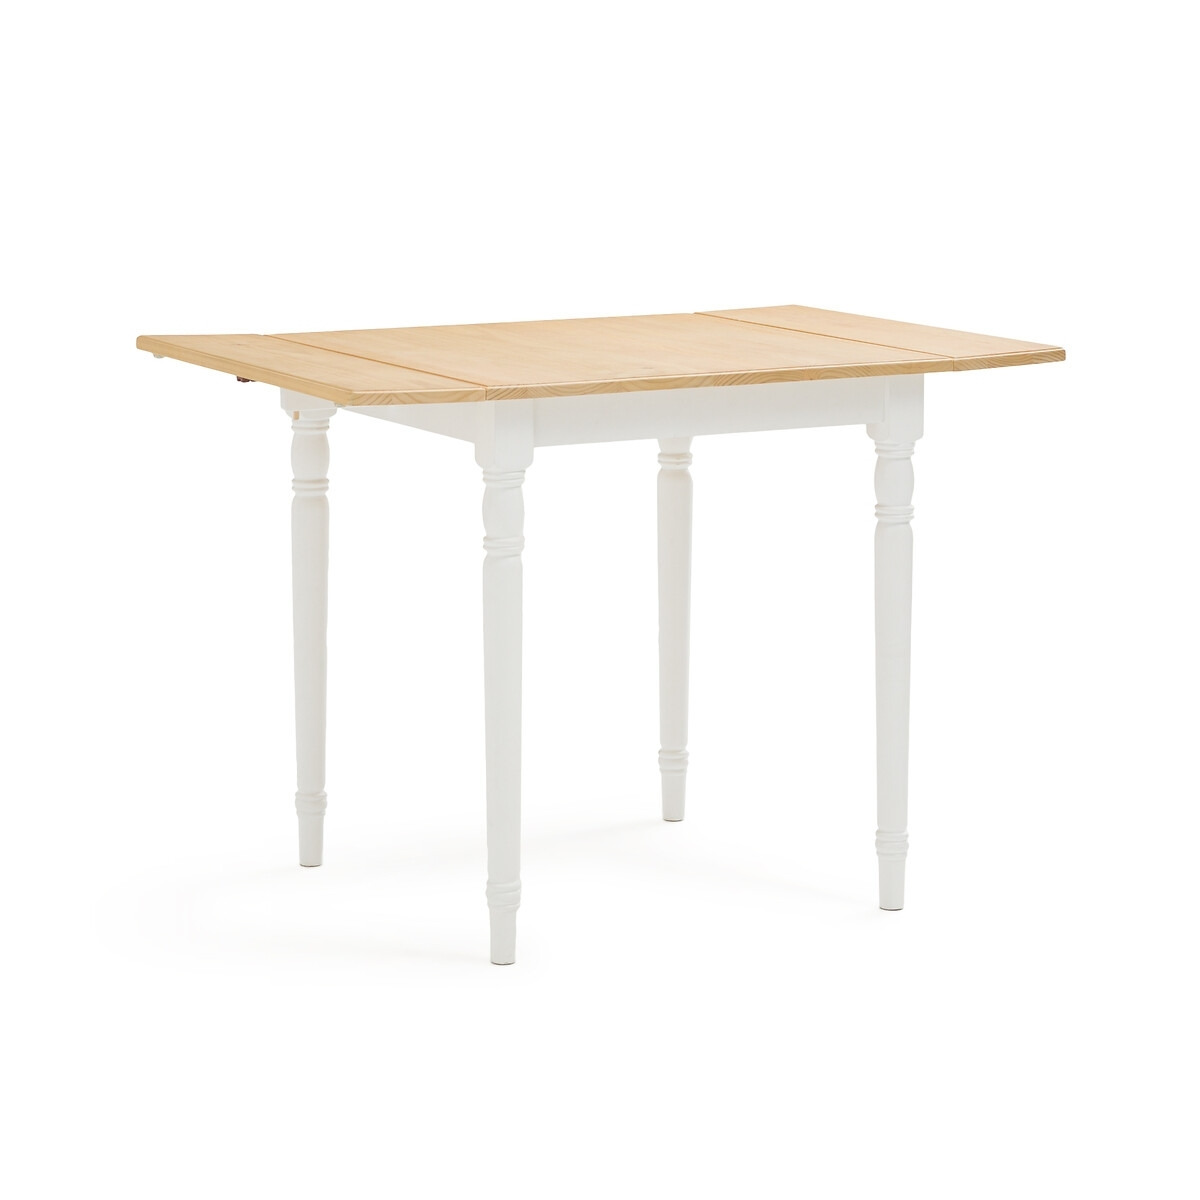 Alvina Extendable Pine Dining Table (Seats 2/4) - image 1